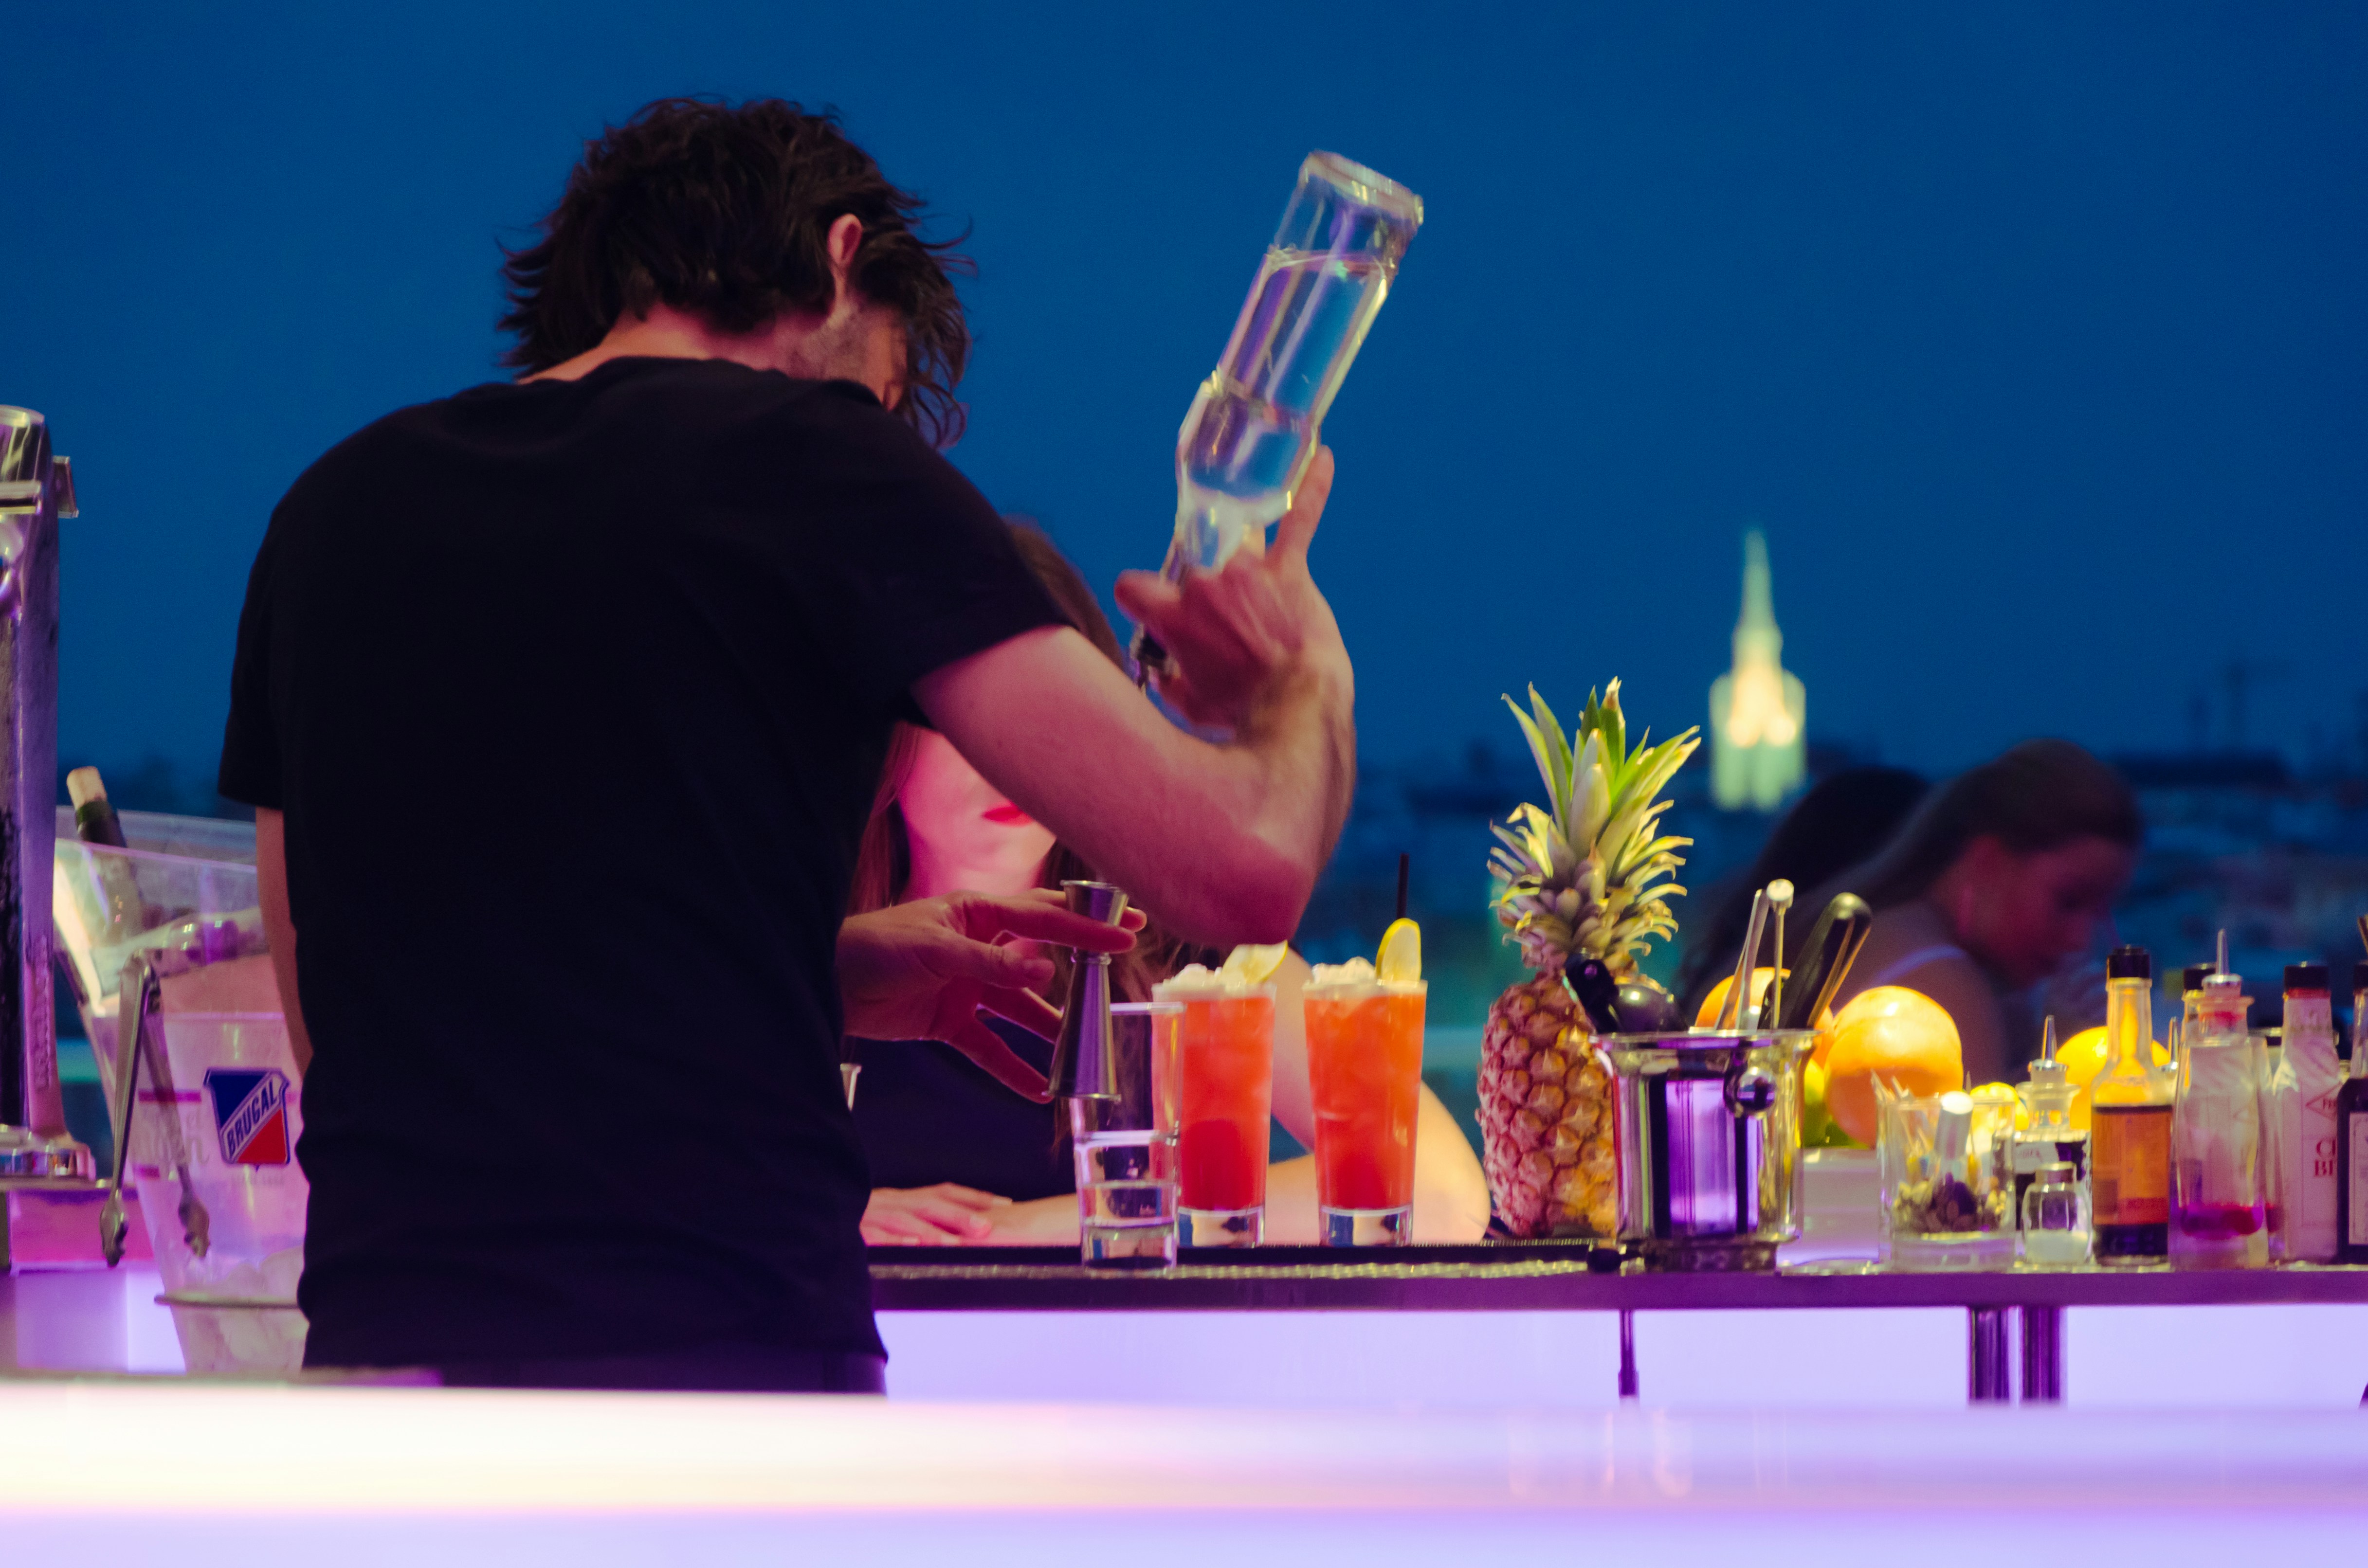 Bartender making a drink at a rooftop bar in Madrid.